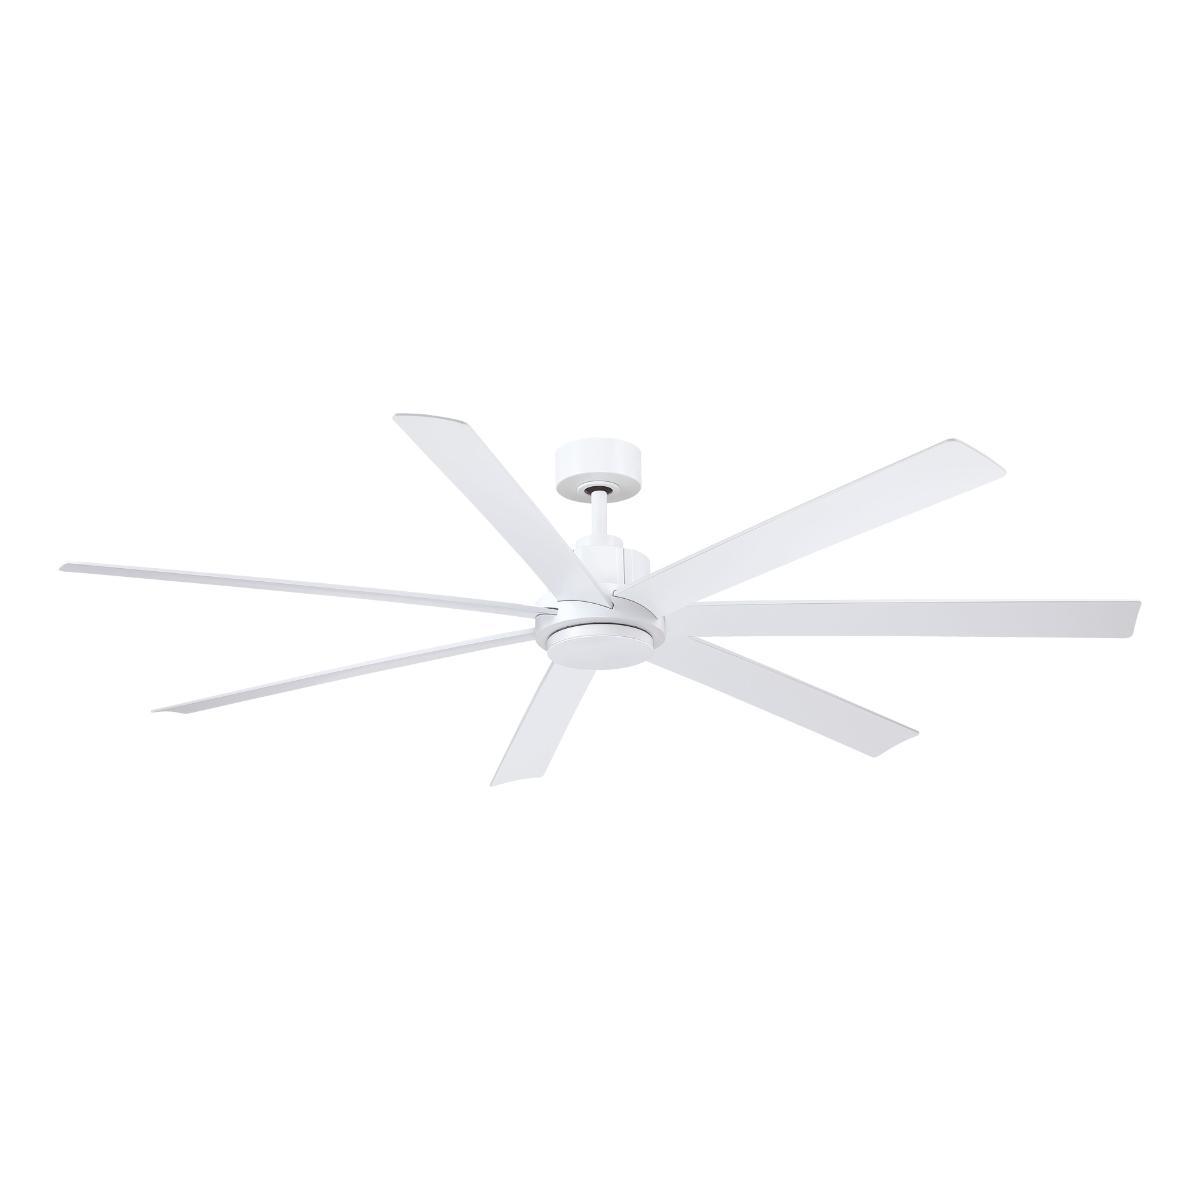 Pendry 72 inch Indoor/Outdoor Ceiling Fan with Remote, Matte White Finish - Bees Lighting